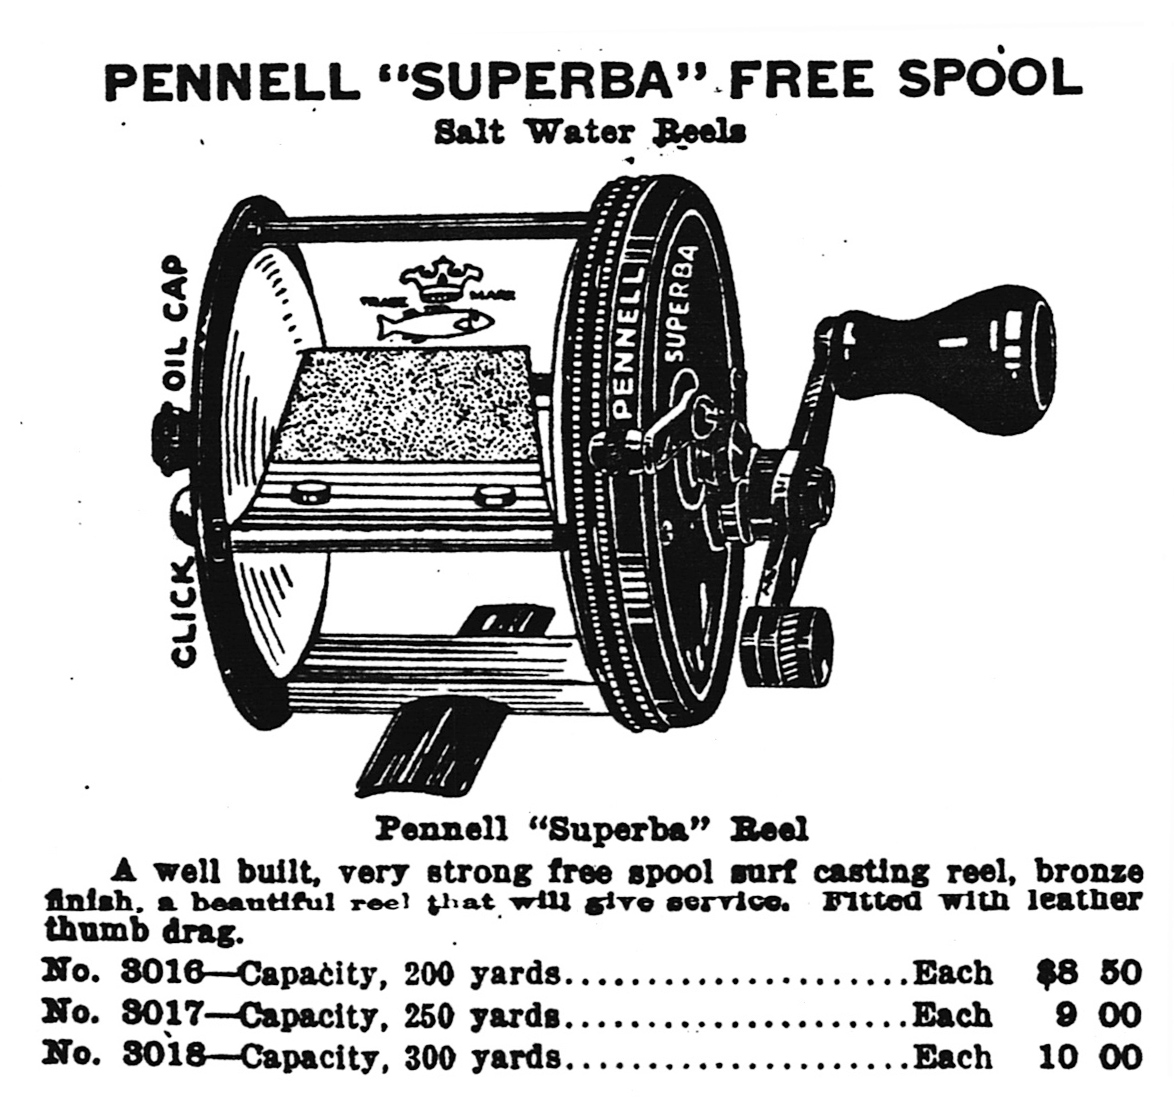 Pennell-Superba - looking for actual manufactuer information